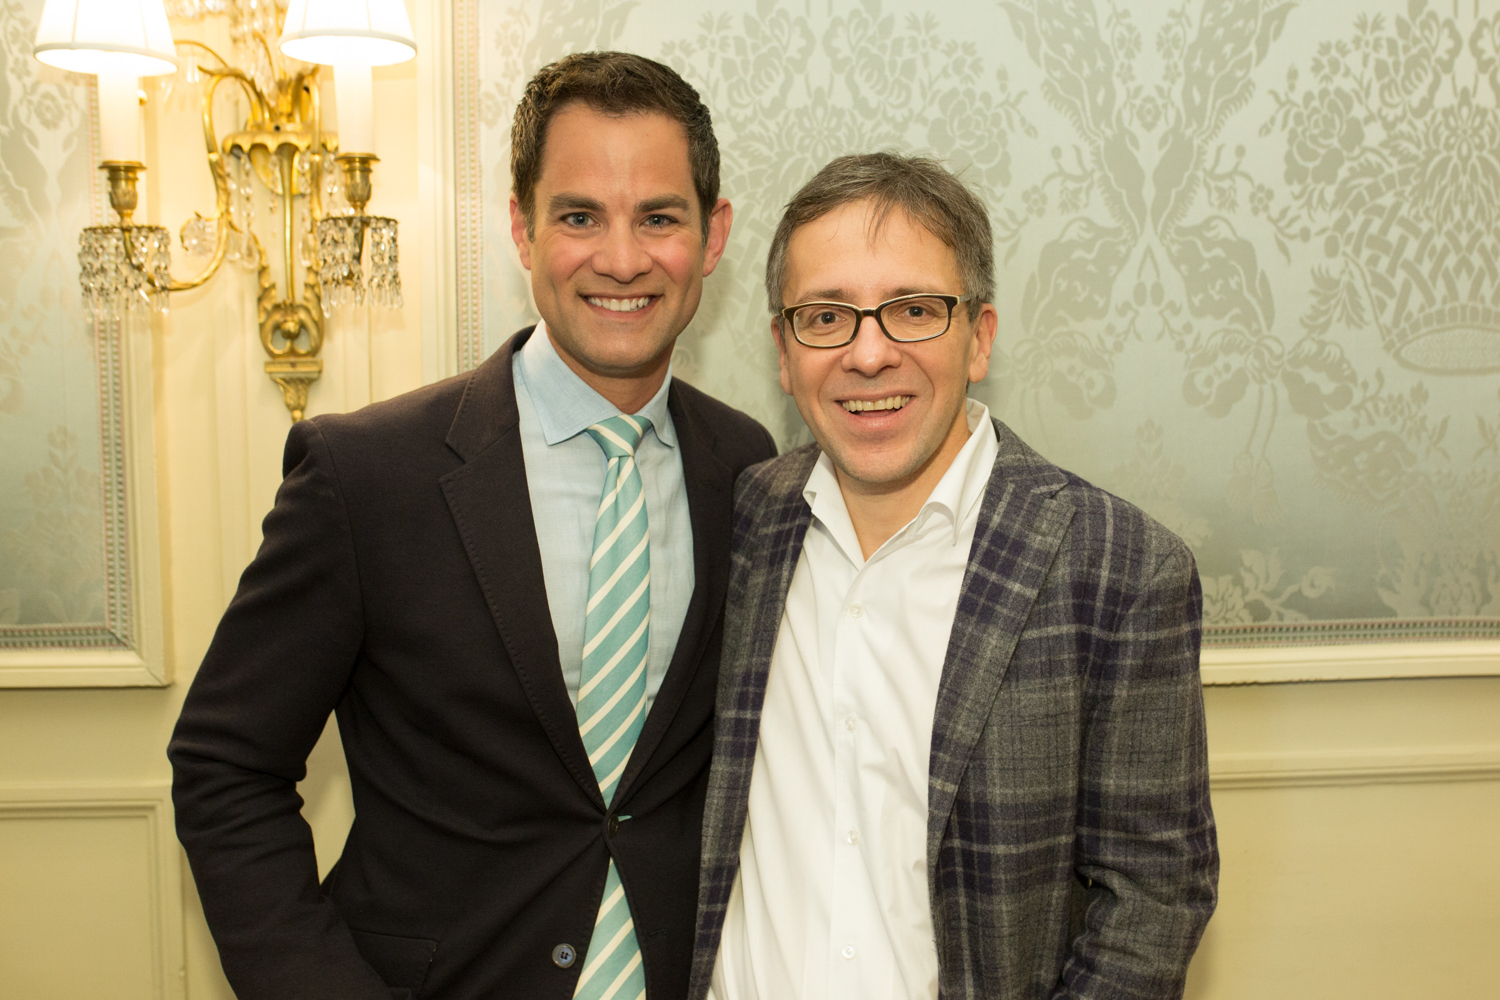 Jaren Bowen and Ian Bremmer stand together and smile for the camera